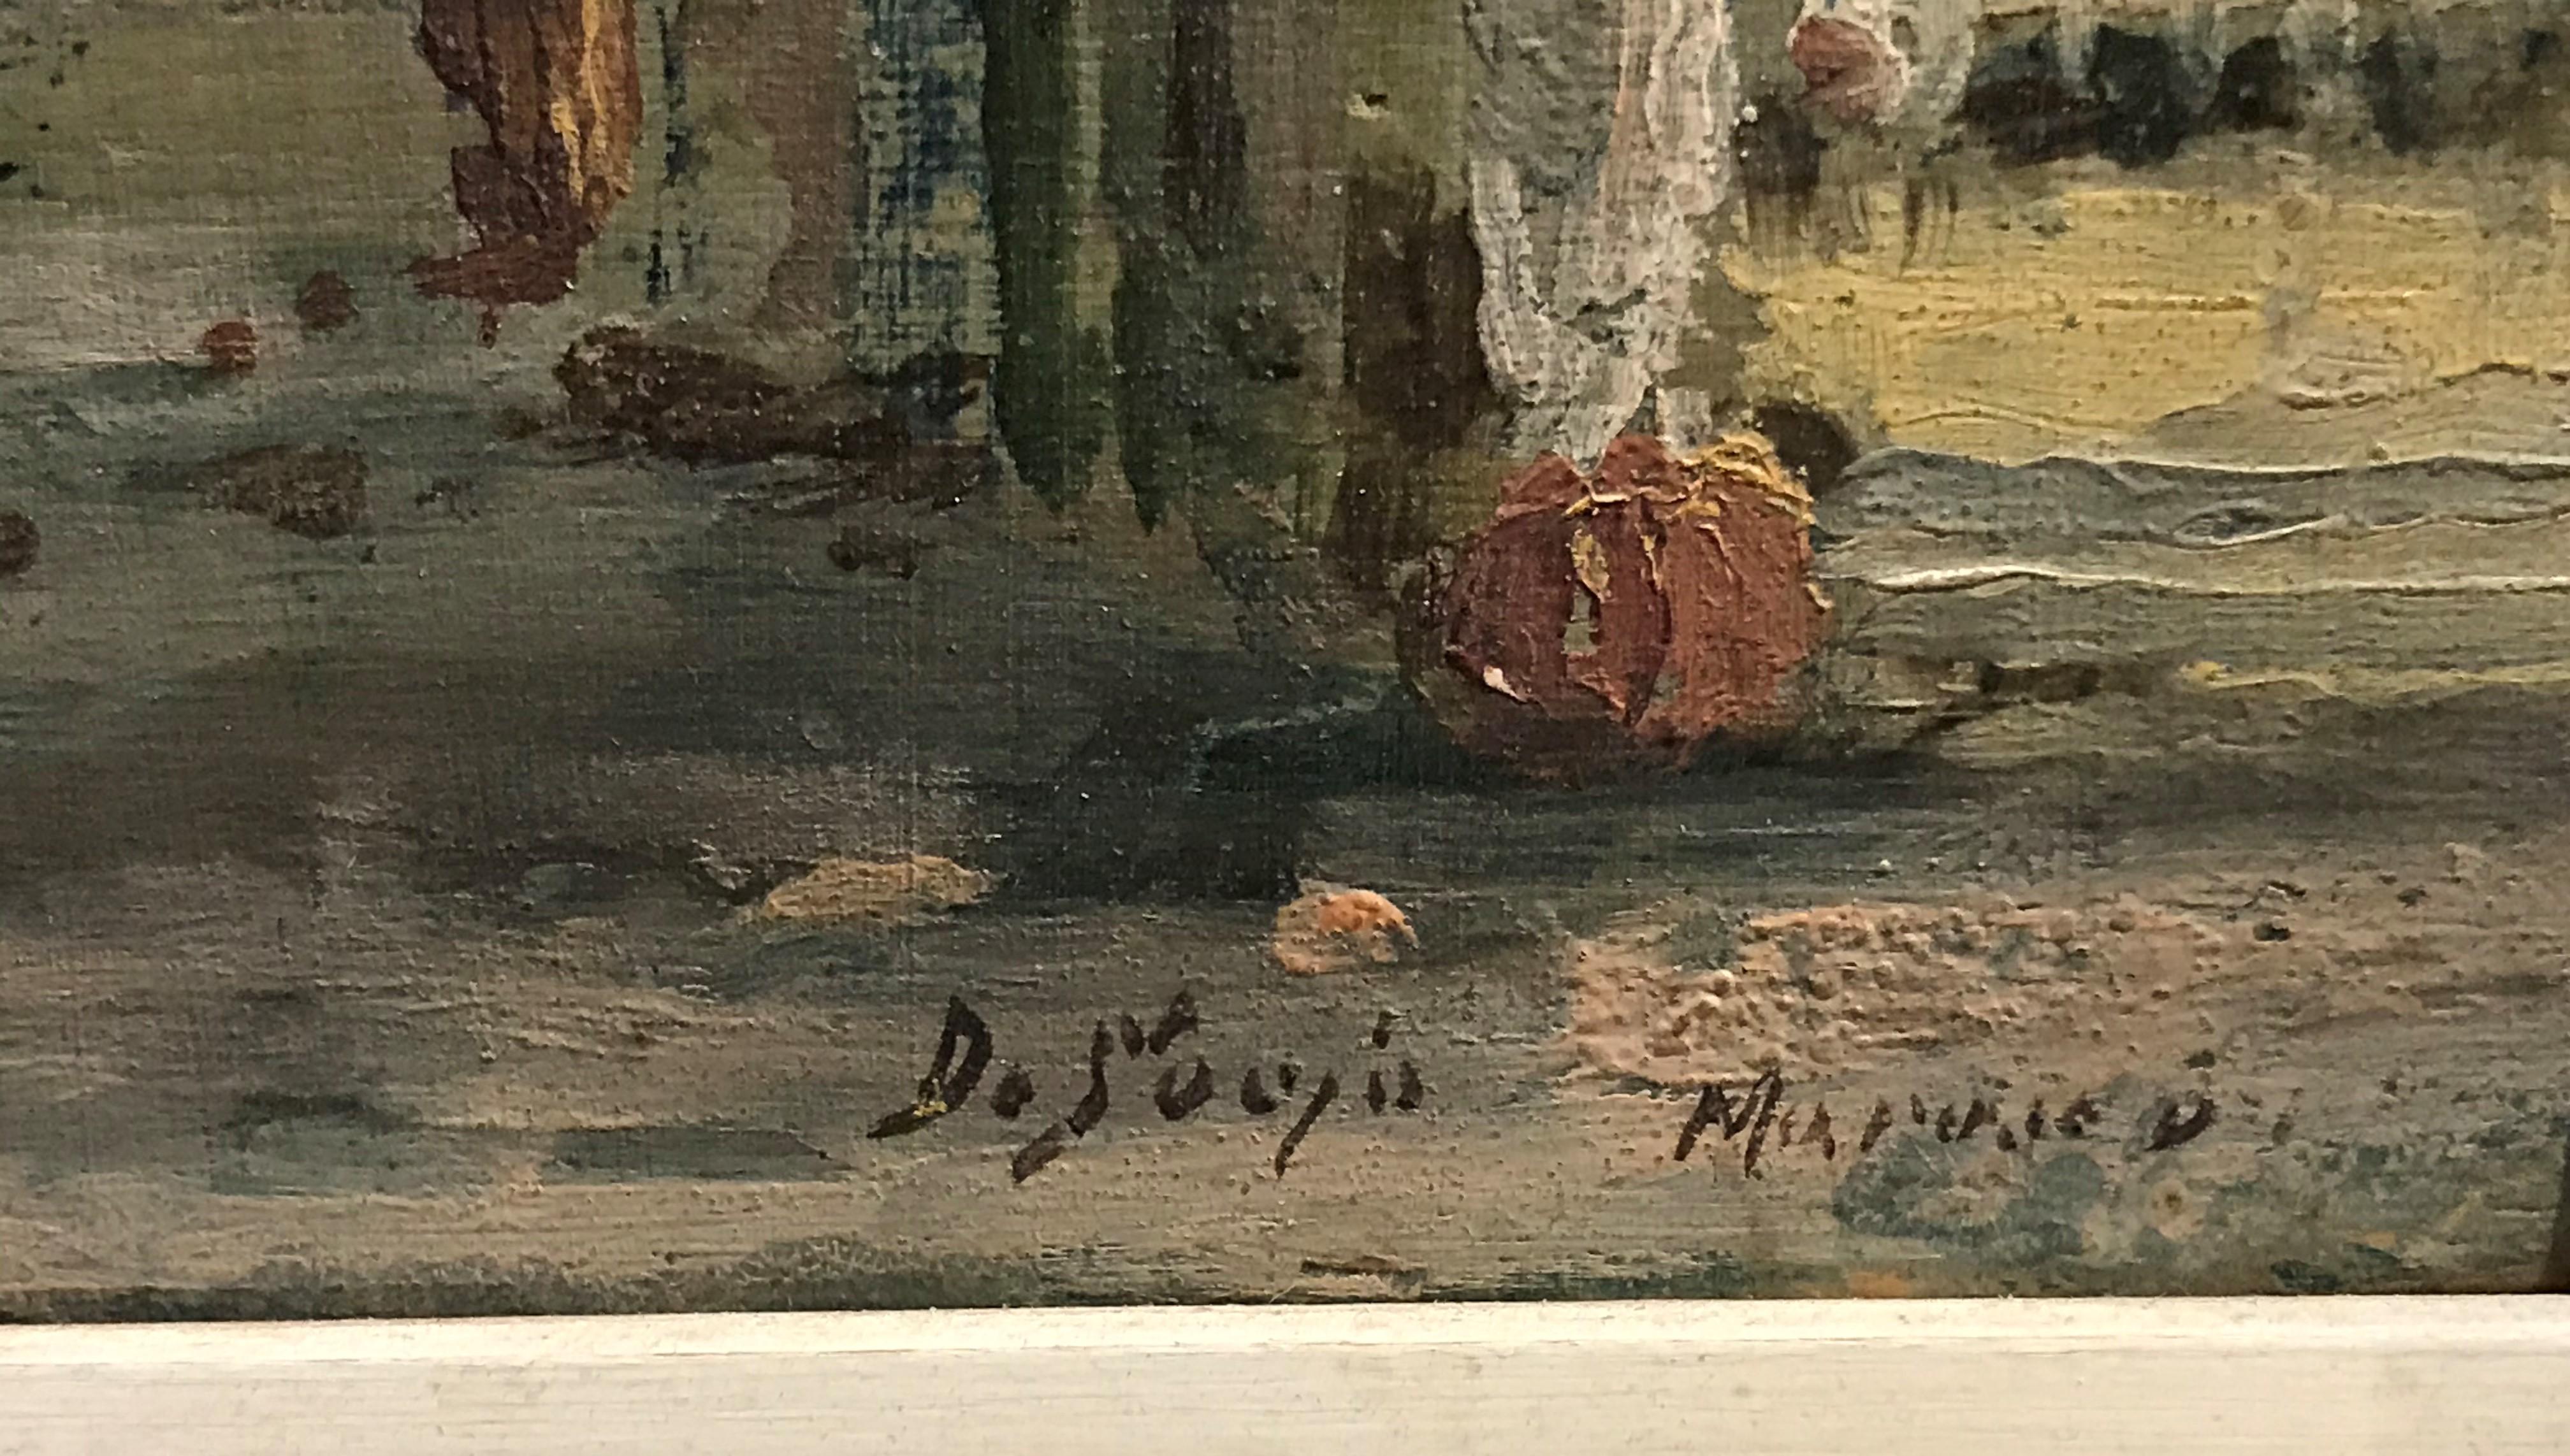 Fine 1930s Framed orientalist painting of Marrakech or Morocco. A street scene, in oil painted on board (wood). Signed lower left. Appears to be DoSousa and Marrakech but is however slightly illegible. The painted board has a horizontal crack in the